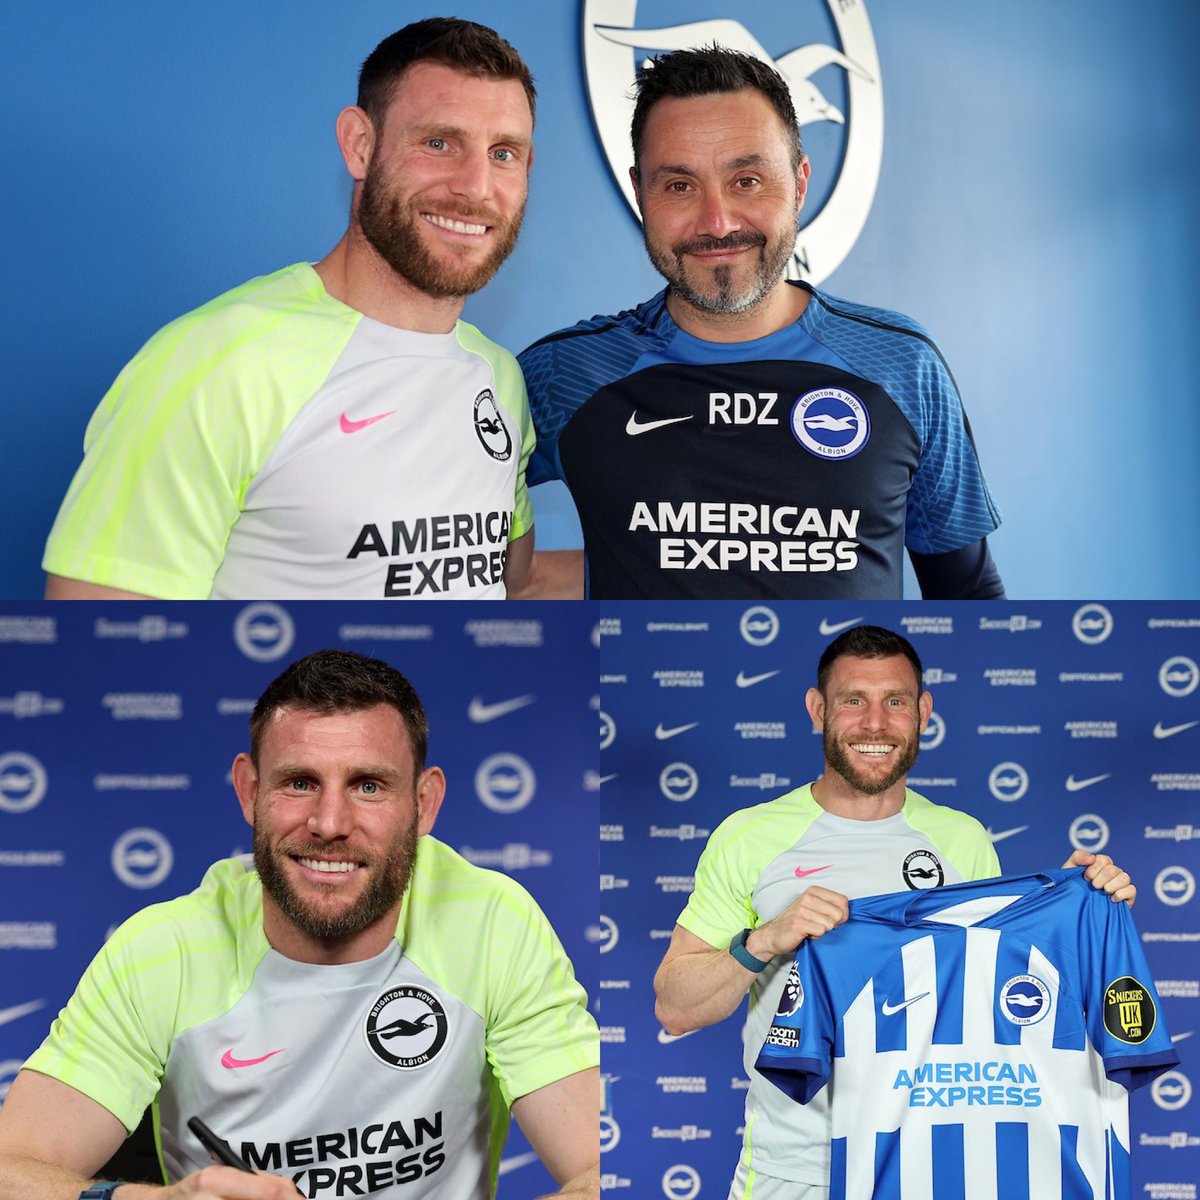 Delighted to extend my stay @OfficialBHAFC, enjoyed playing with the boys in a historic season for the club. Very frustrated being injured for the past few months but working hard to be back ready for the start of next season and hungrier than ever to contribute to the success of